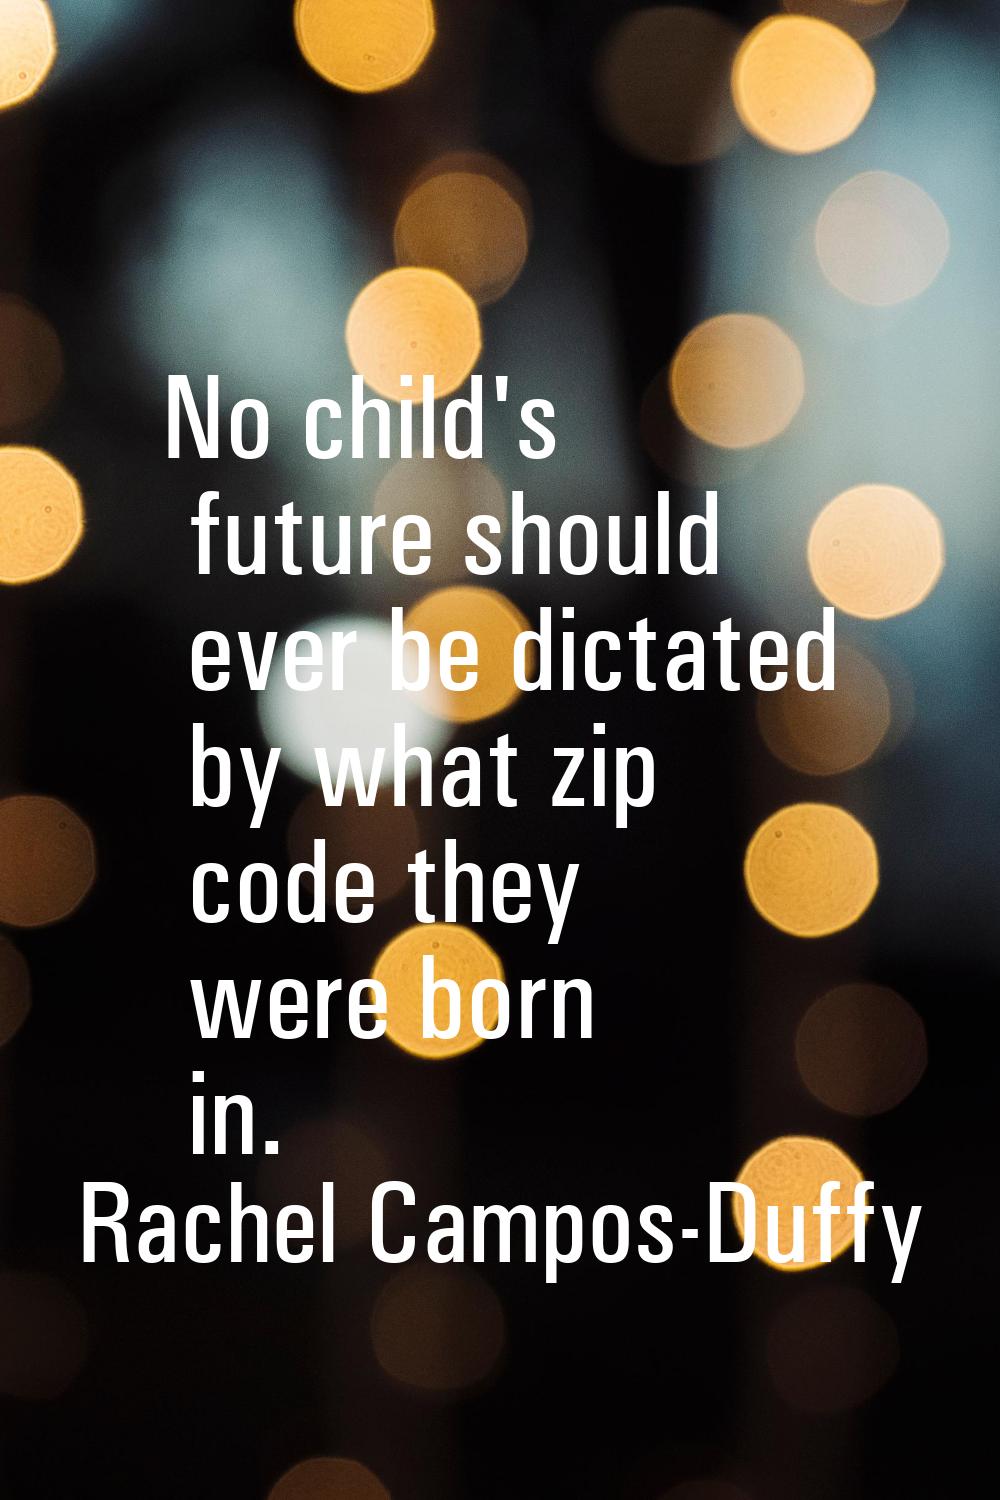 No child's future should ever be dictated by what zip code they were born in.